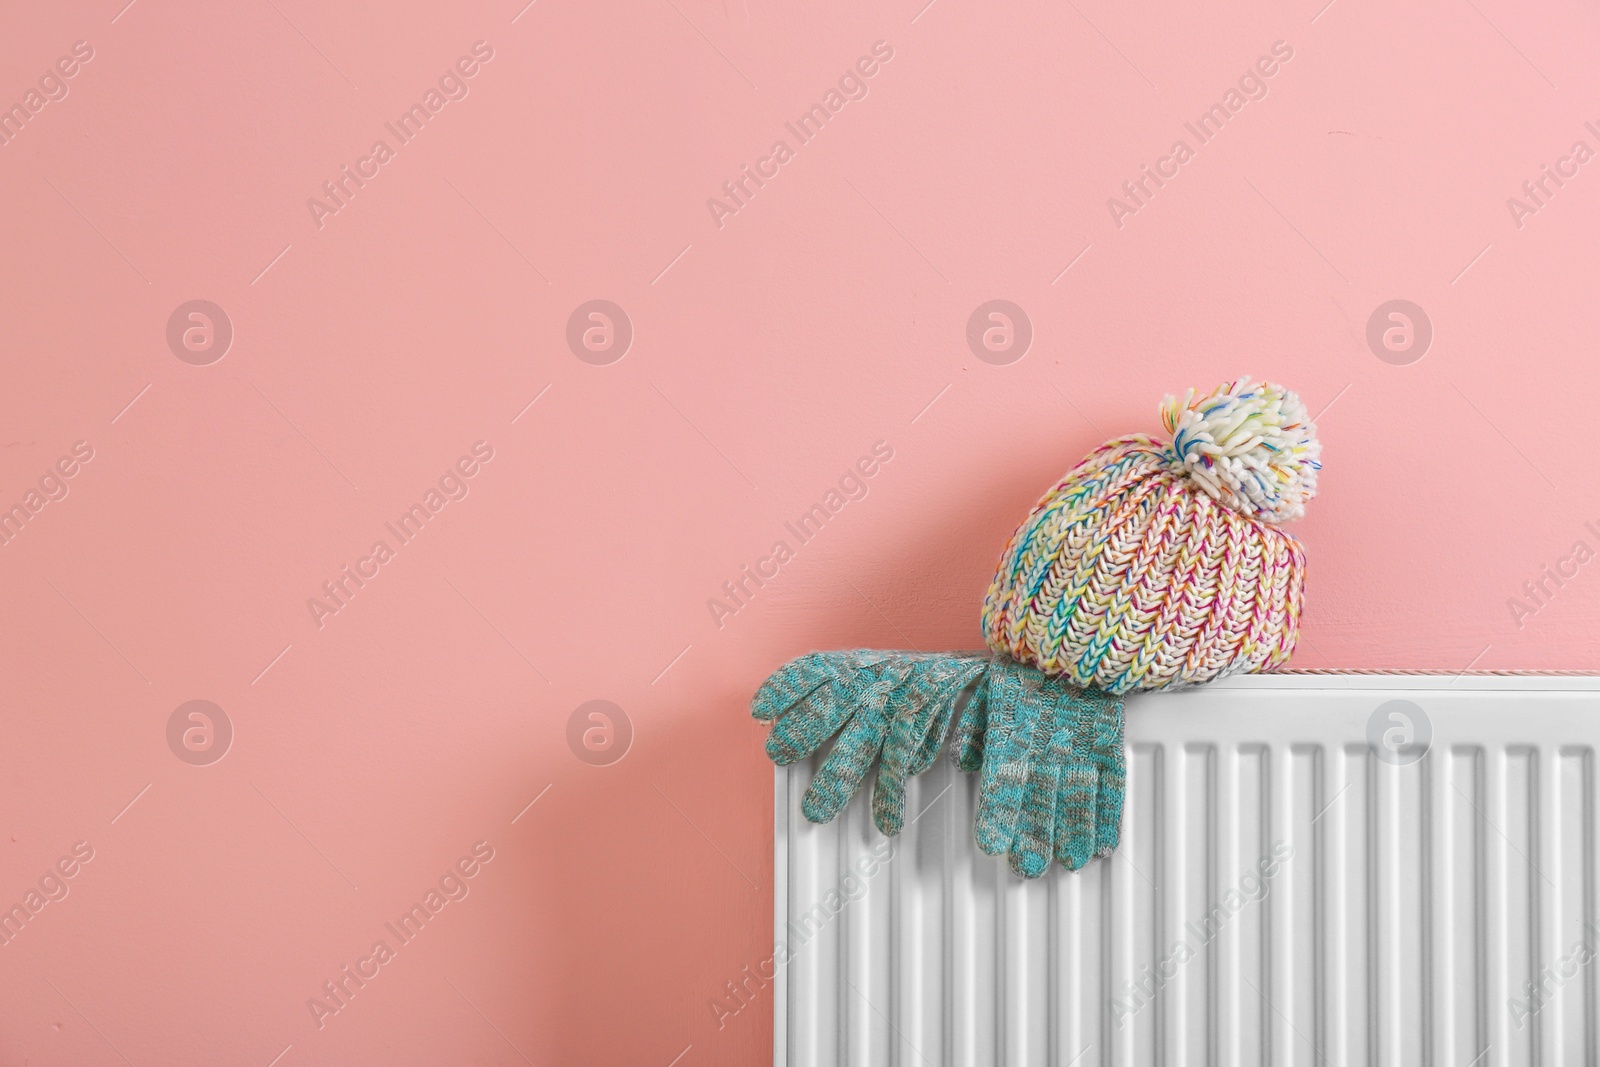 Photo of Heating radiator with knitted cap and gloves near color wall.Space for text